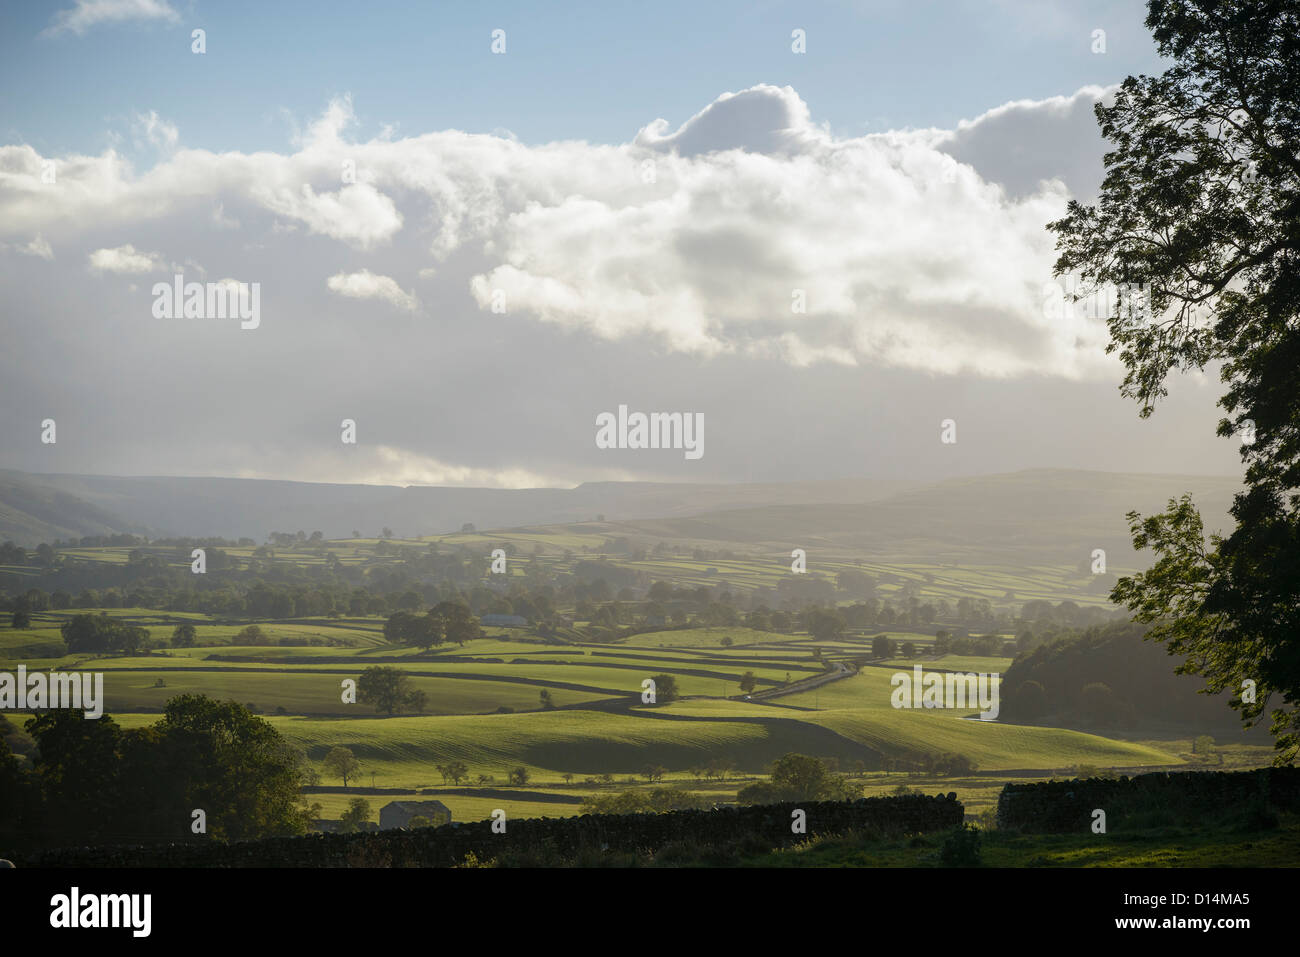 Aerial view of rural landscape Stock Photo